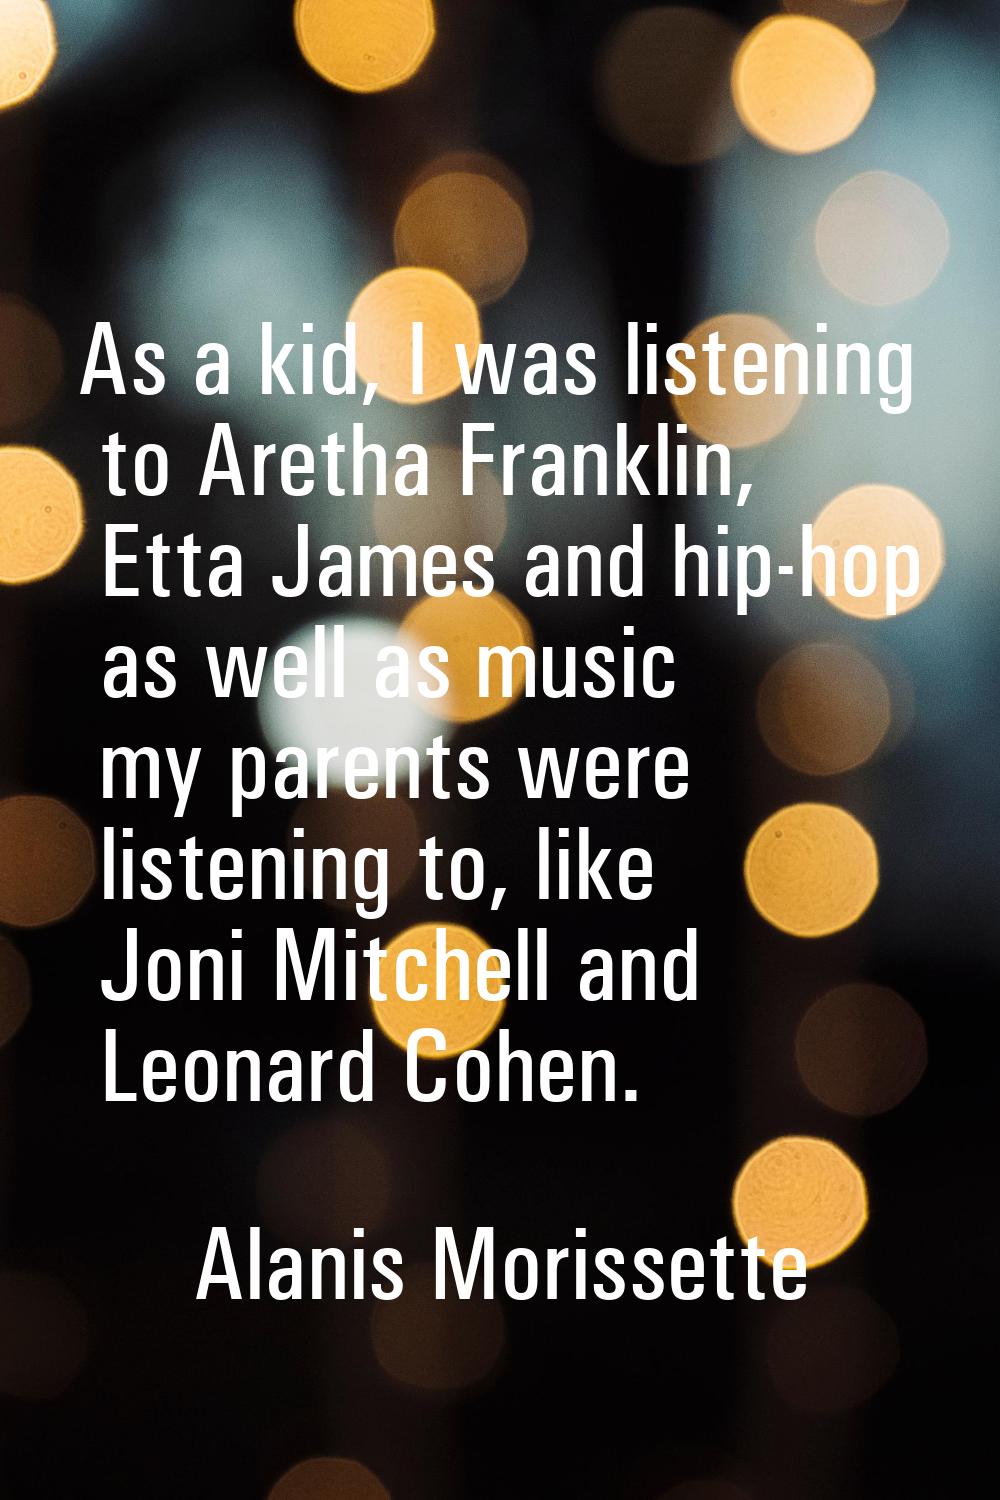 As a kid, I was listening to Aretha Franklin, Etta James and hip-hop as well as music my parents we